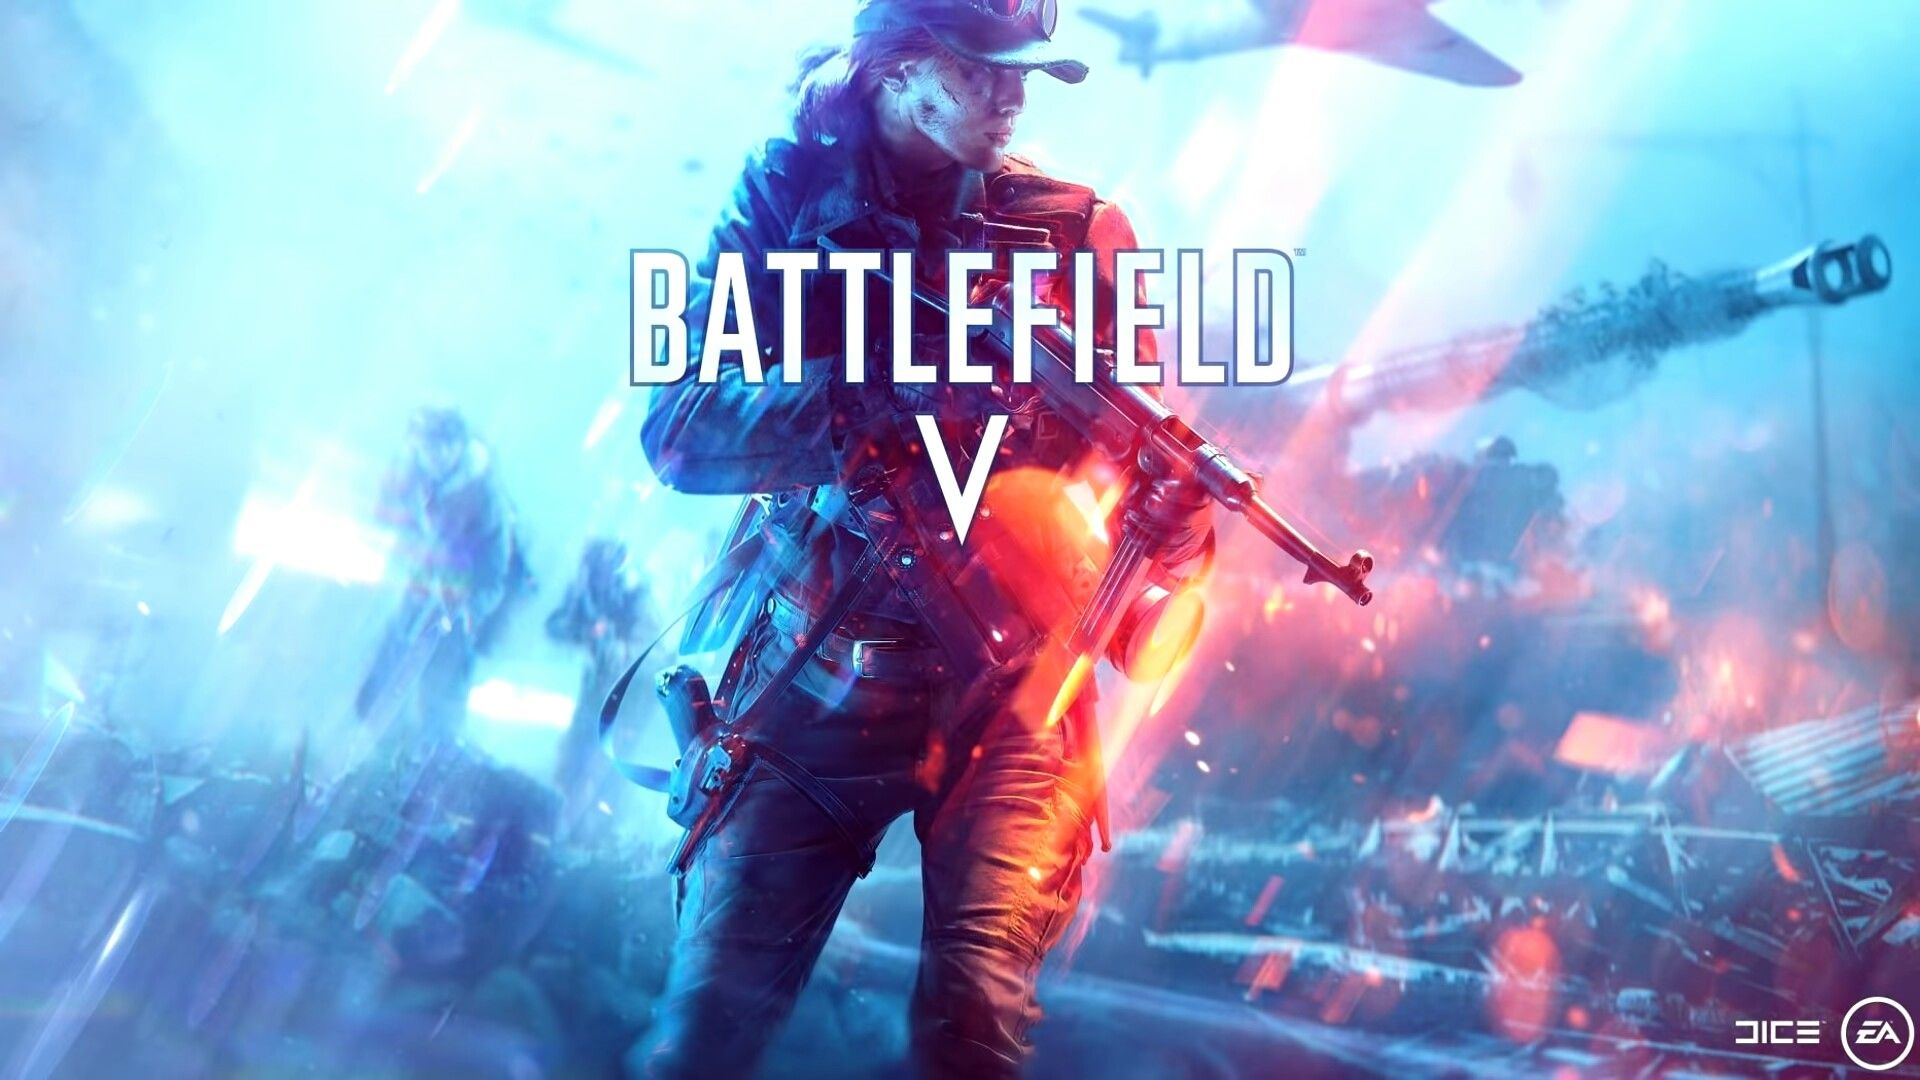 Battlefield 5 is played more than BF 2042 